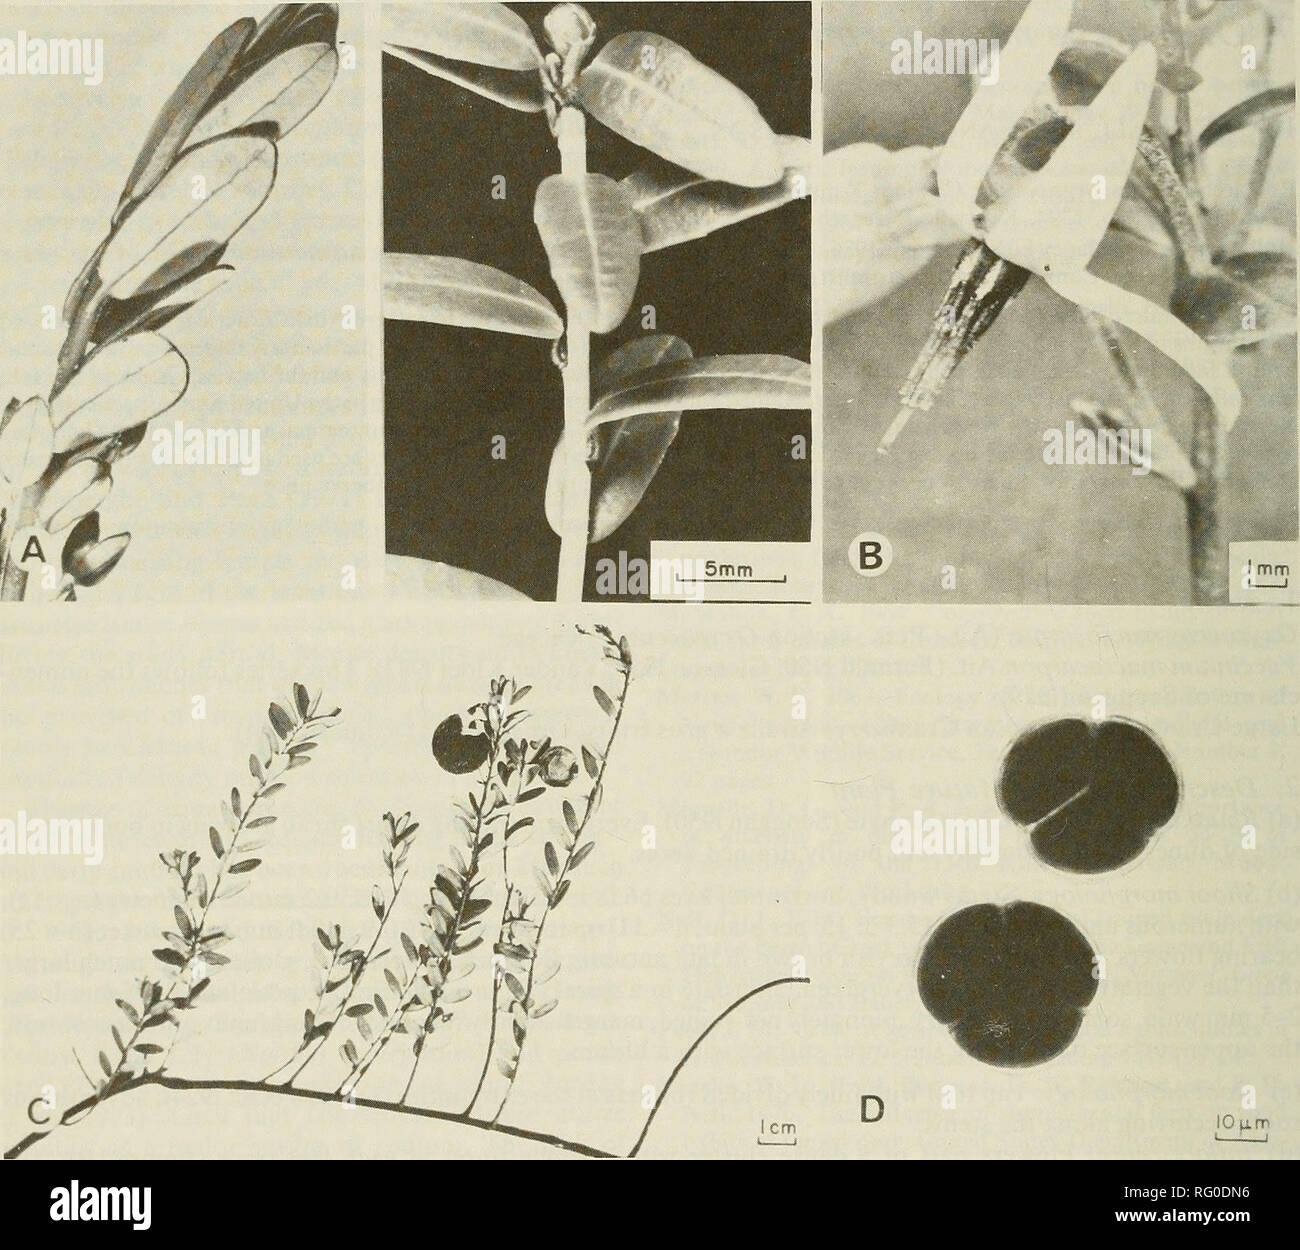 . The Canadian field-naturalist. 90 The Canadian Field-Naturalist Vol. 100. Figure 1. Vegetative and reproductive phases of Oxycoccus macrocarpus (Ait.) Pers. A. Two pliases of cranberry shoot growth. At the right, the shoot has terminated growth in the formation of a flower bud; the shoot at the left is vegetative. (3X) B. Cranberry flower. (4X) C. Cranberry fruits are borne on upright shoots arising from the main stolon. (0.5X) D. Cranberry pollen. (650X) (h) Chromosome numbers: In - lA has been reported by Darrow et al. (1944) and Vander Kloet (1983) from plants collected in eastern North A Stock Photo